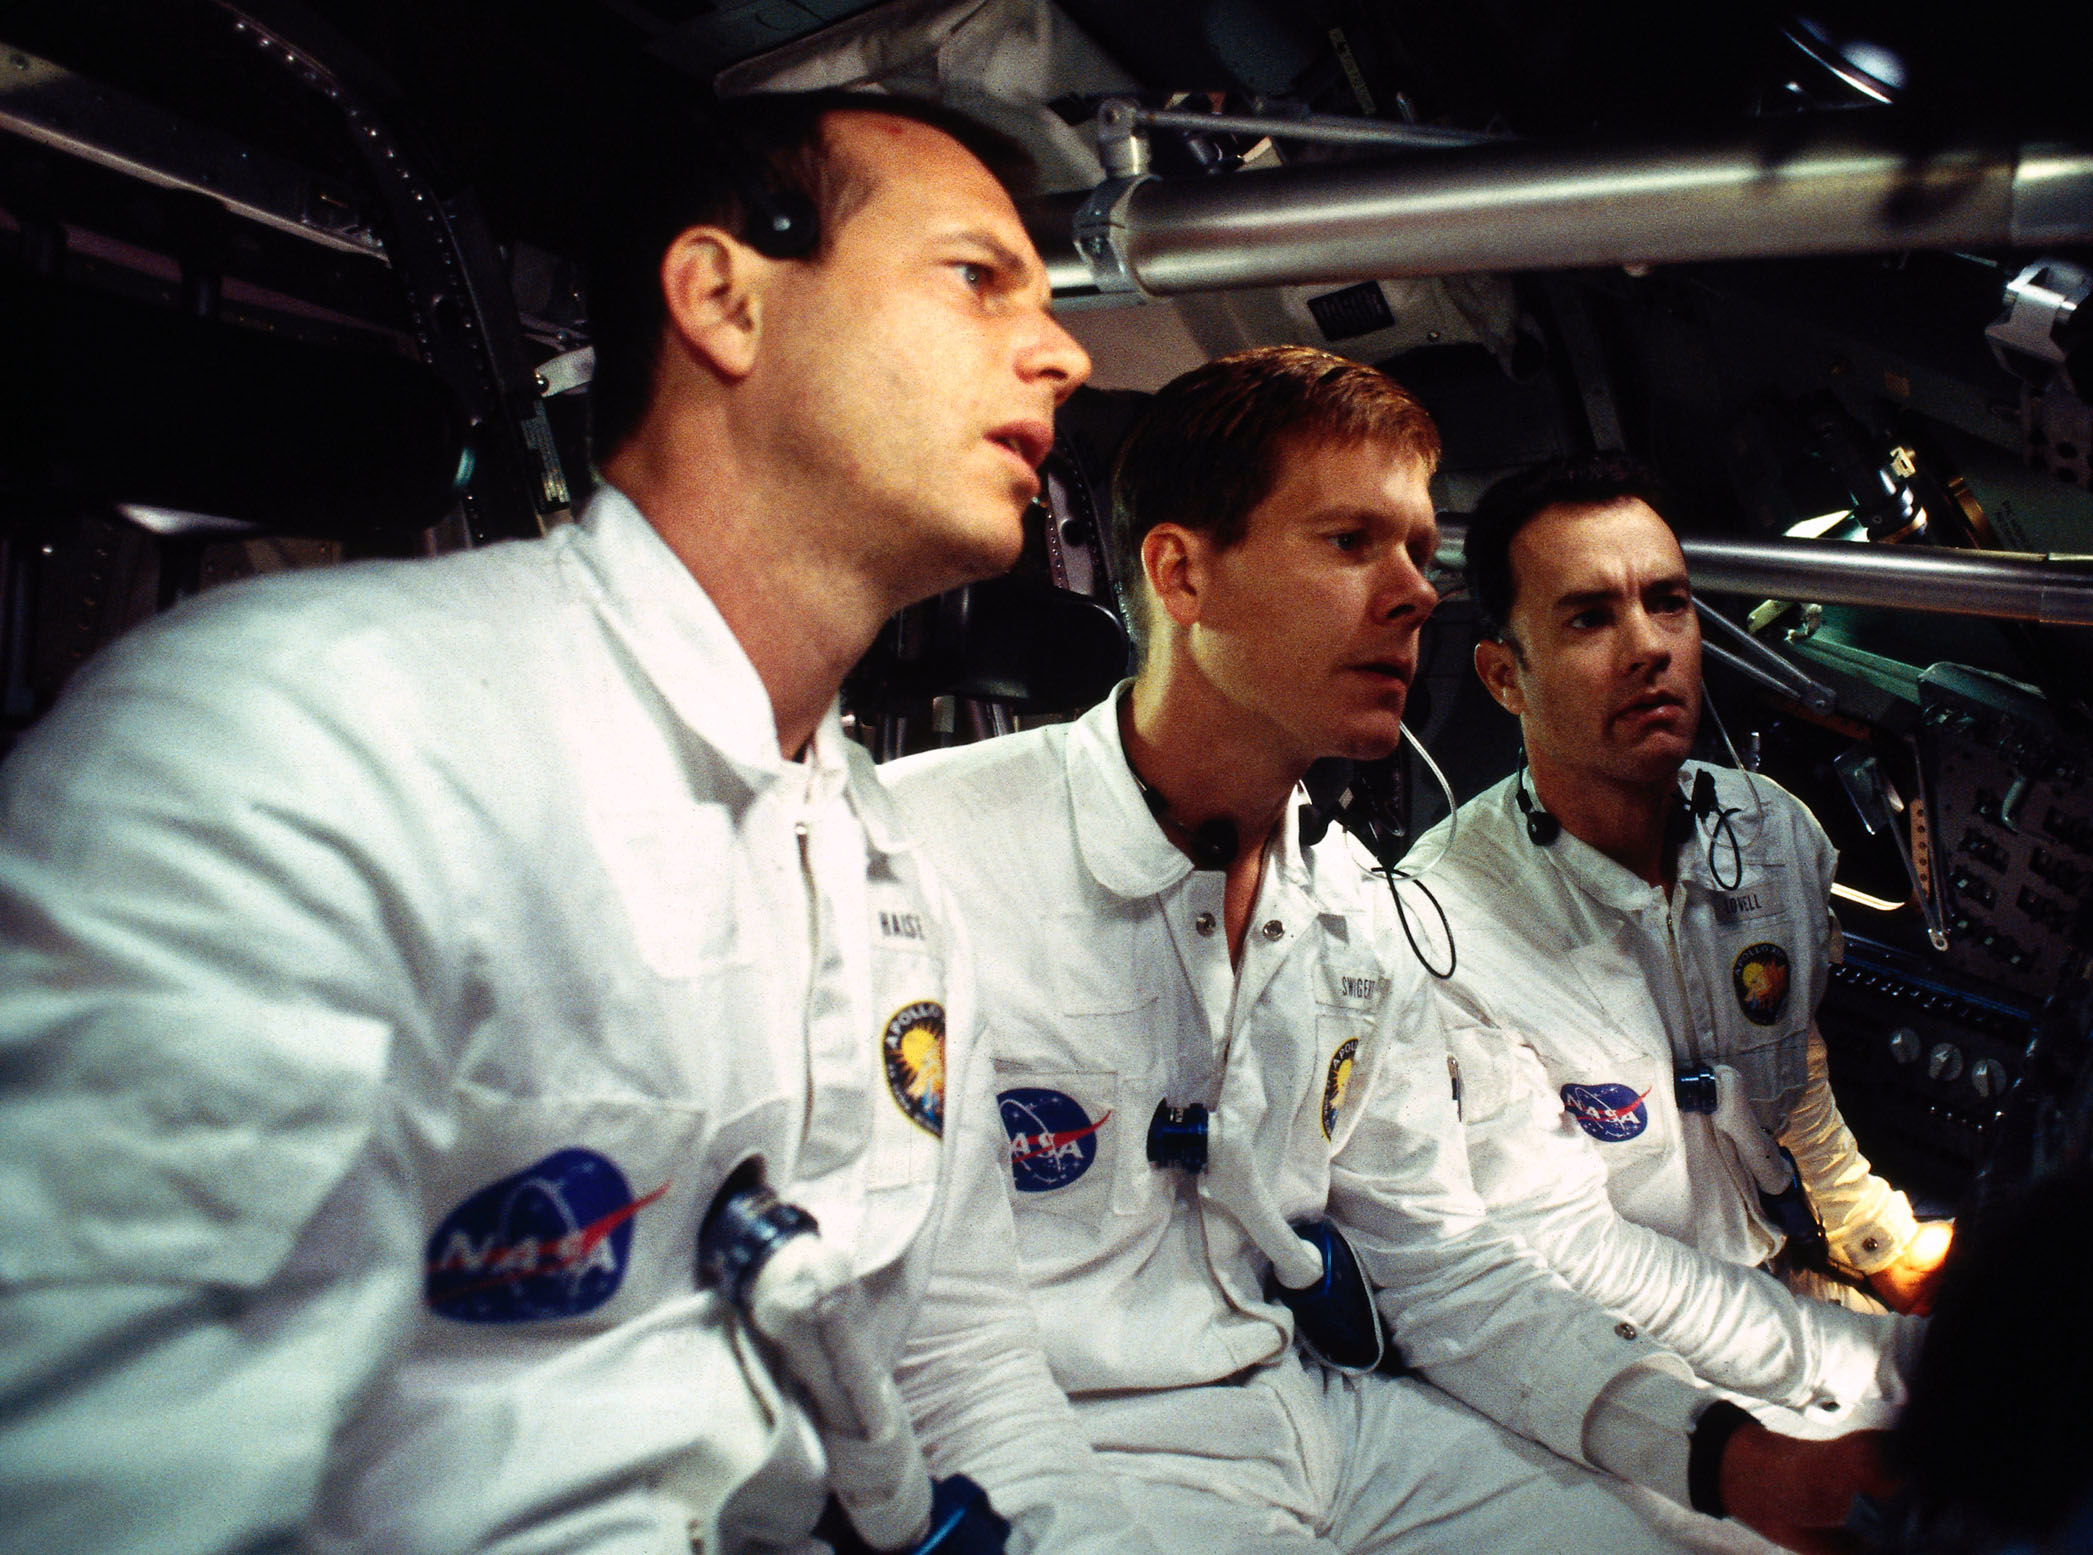 Bill Paxton, Kevin Bacon, and Tom Hanks ride in a space ship